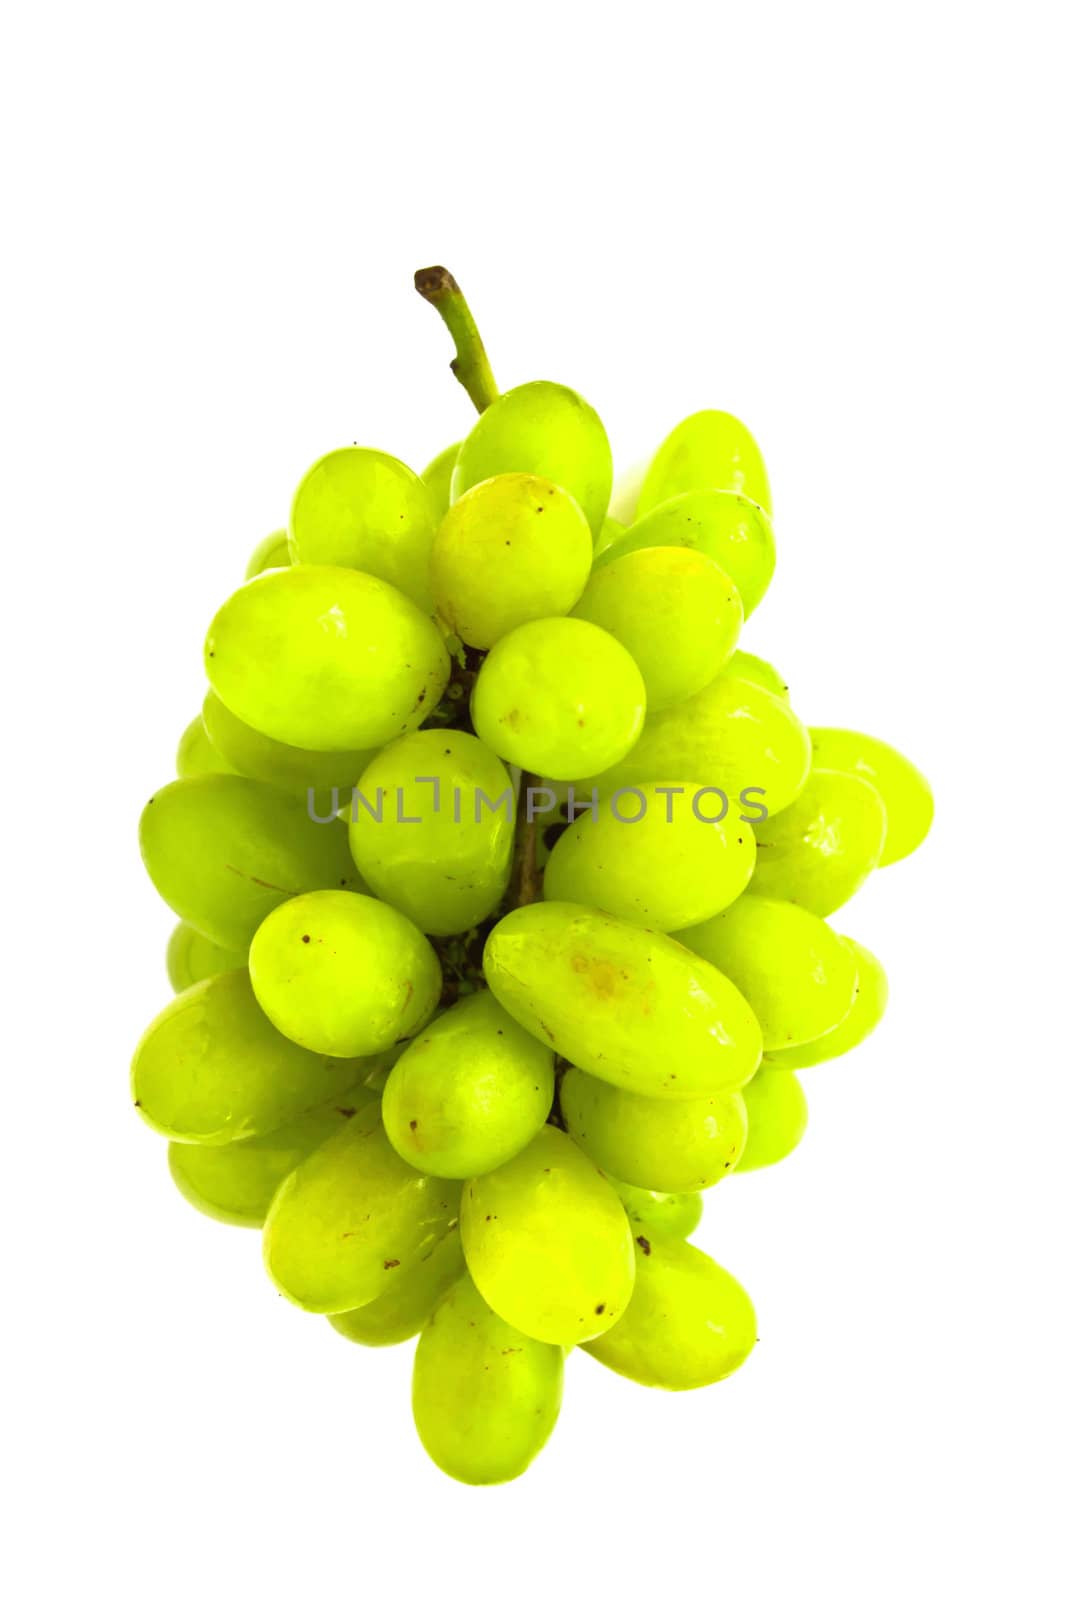 Grape on a white background by Thanamat